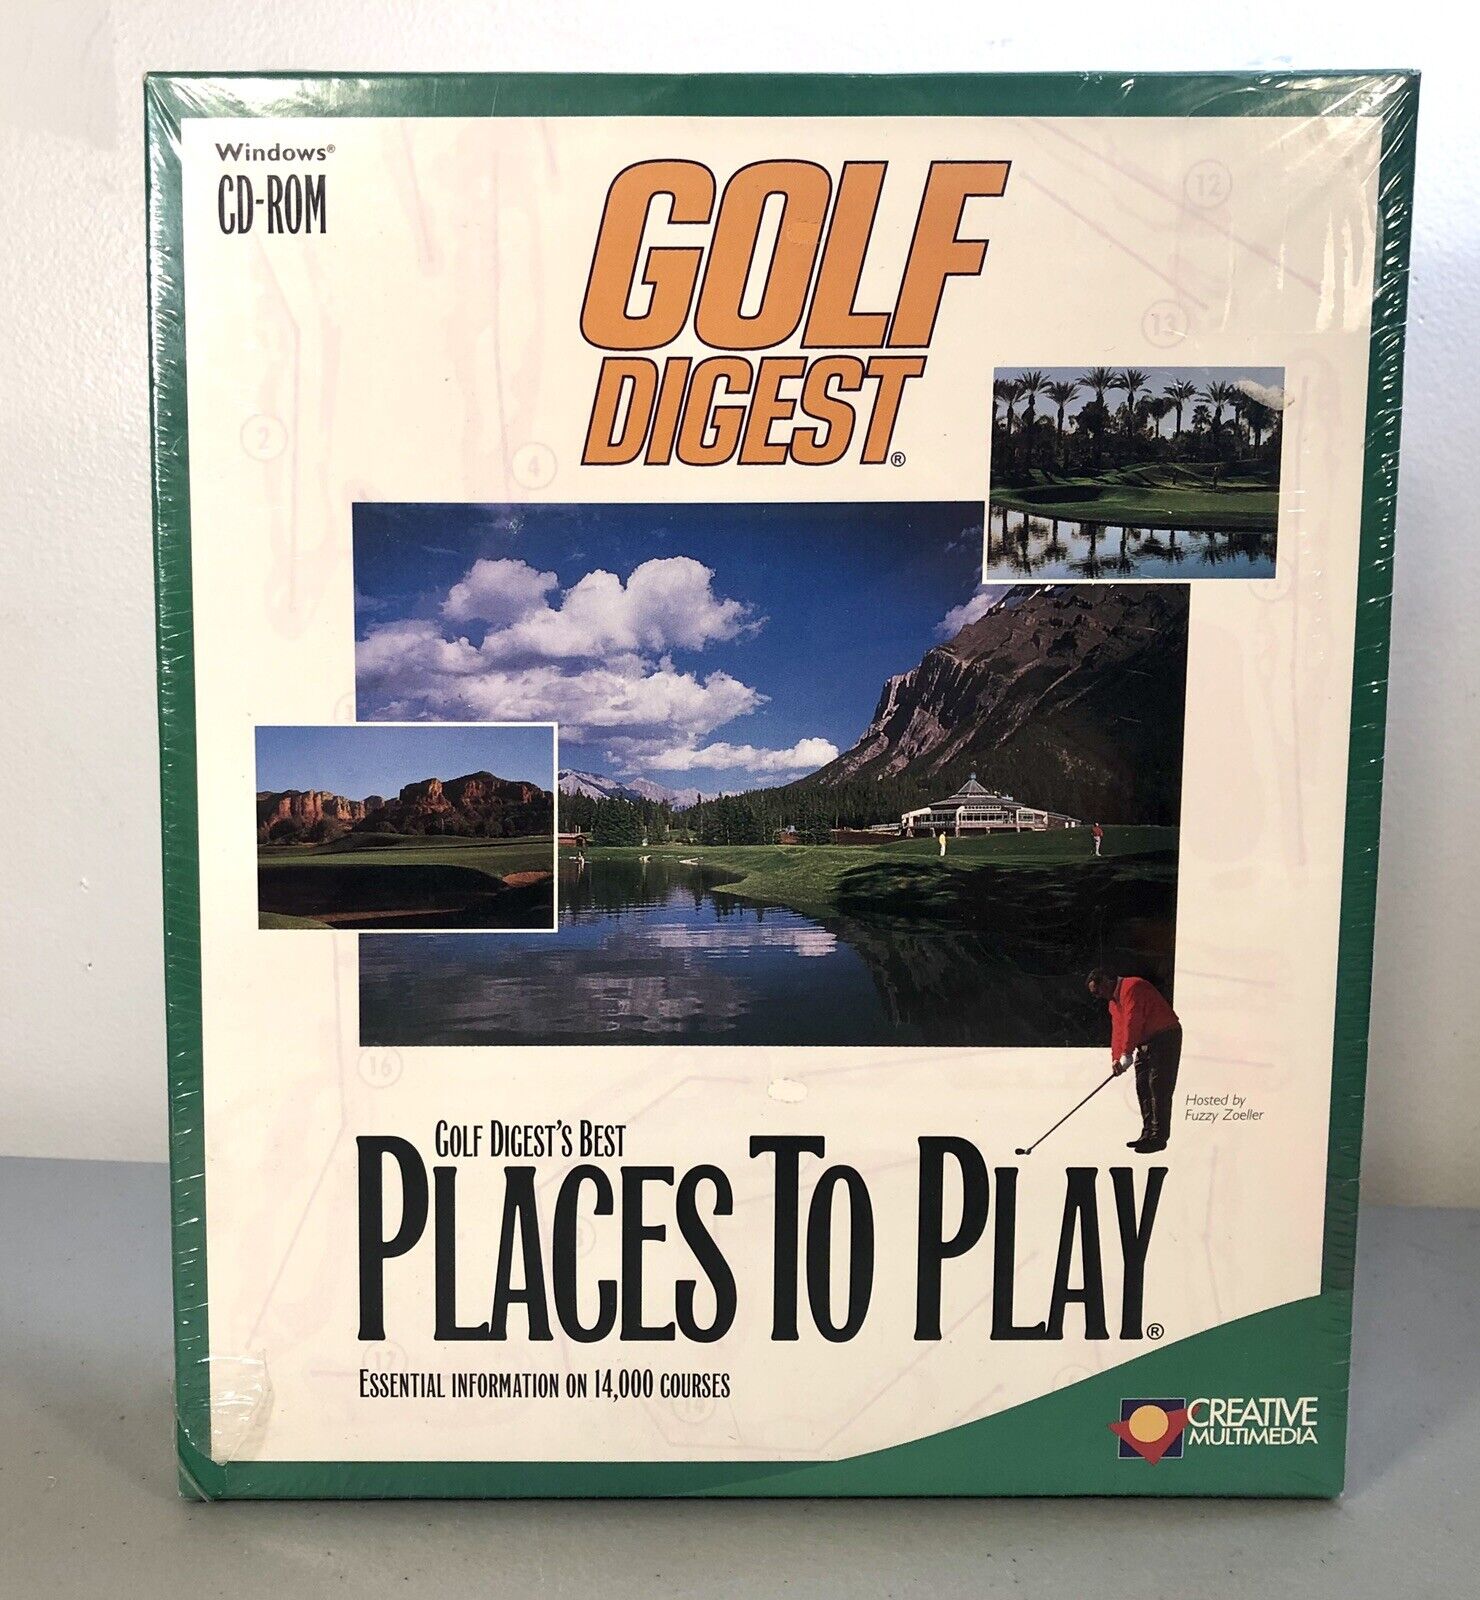 Vintage 1995 Golf Digest Best Places To Play Windows CD ROM